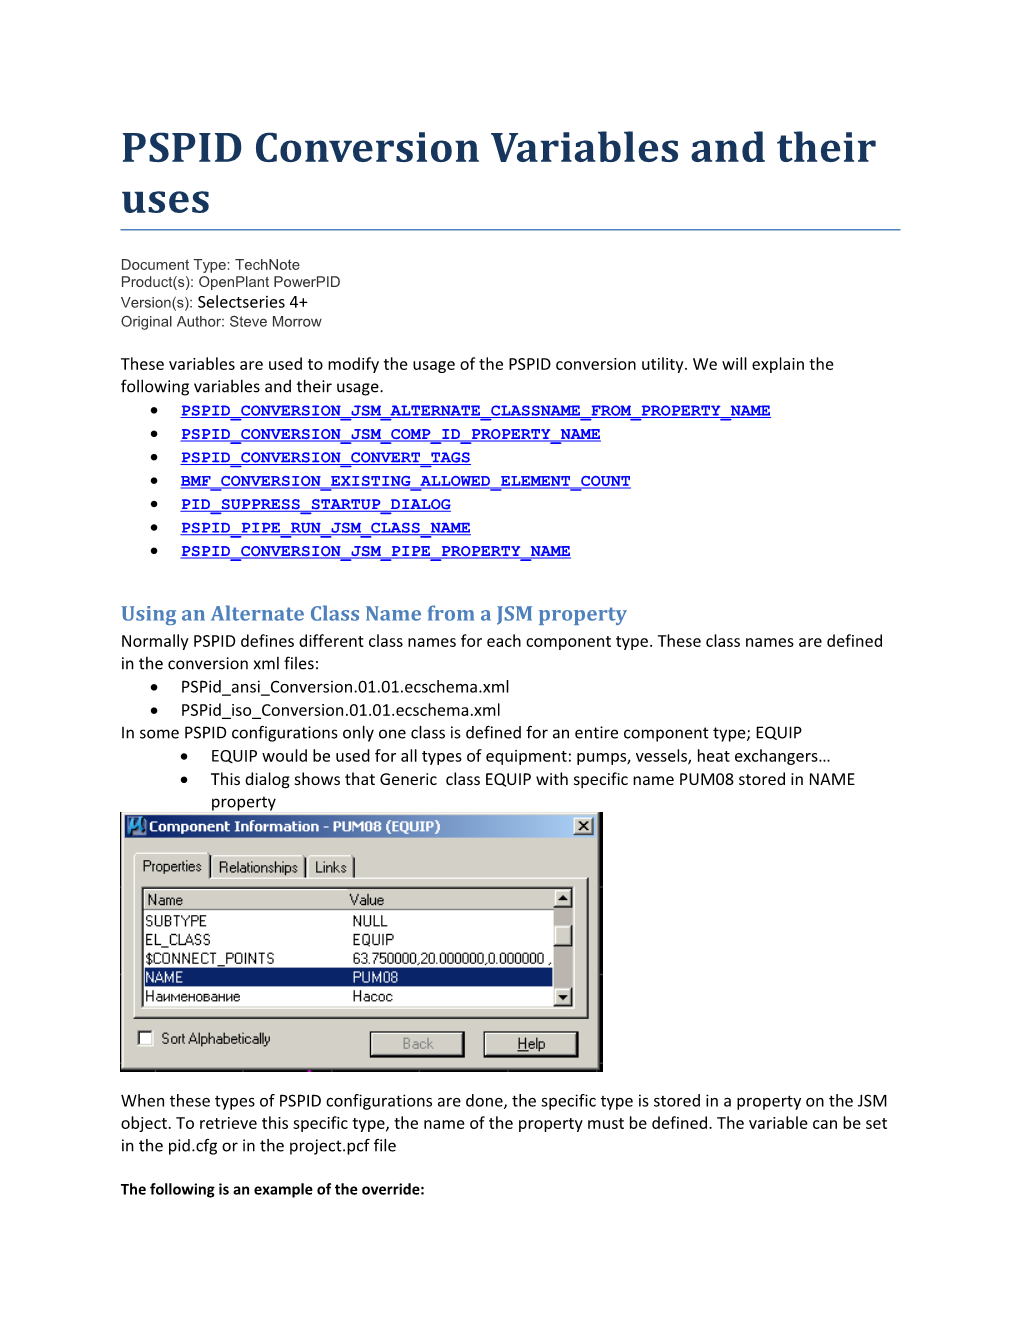 PSPID Conversion Variables and Their Uses